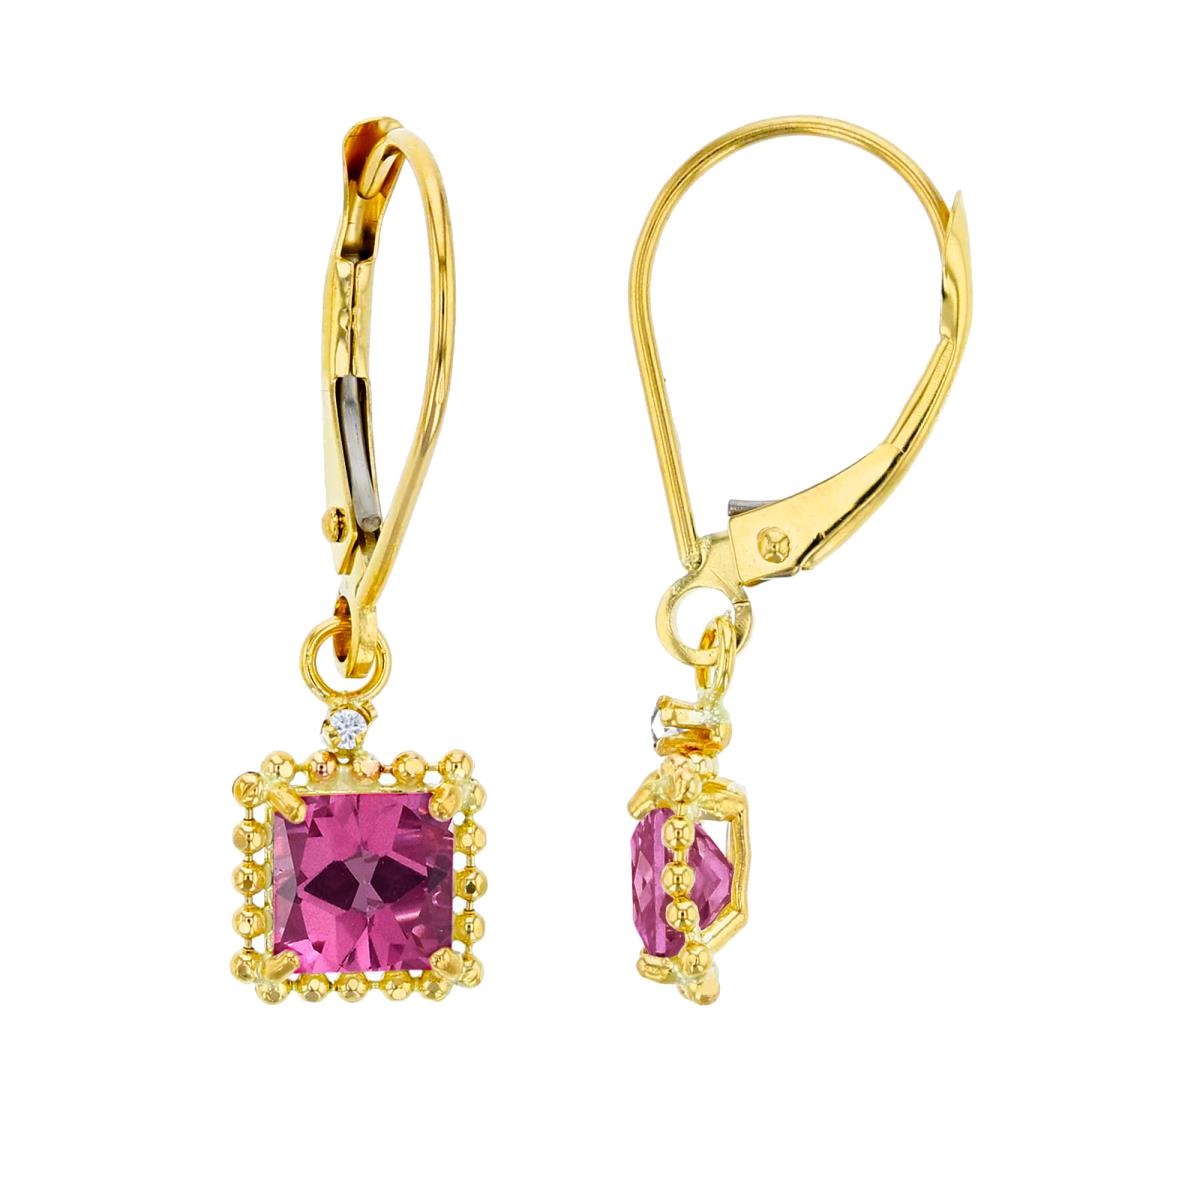 14K Yellow Gold 1.25mm Rd White Topaz & 5mm Sq Pure Pink Bead Frame Drop Lever-Back Earring